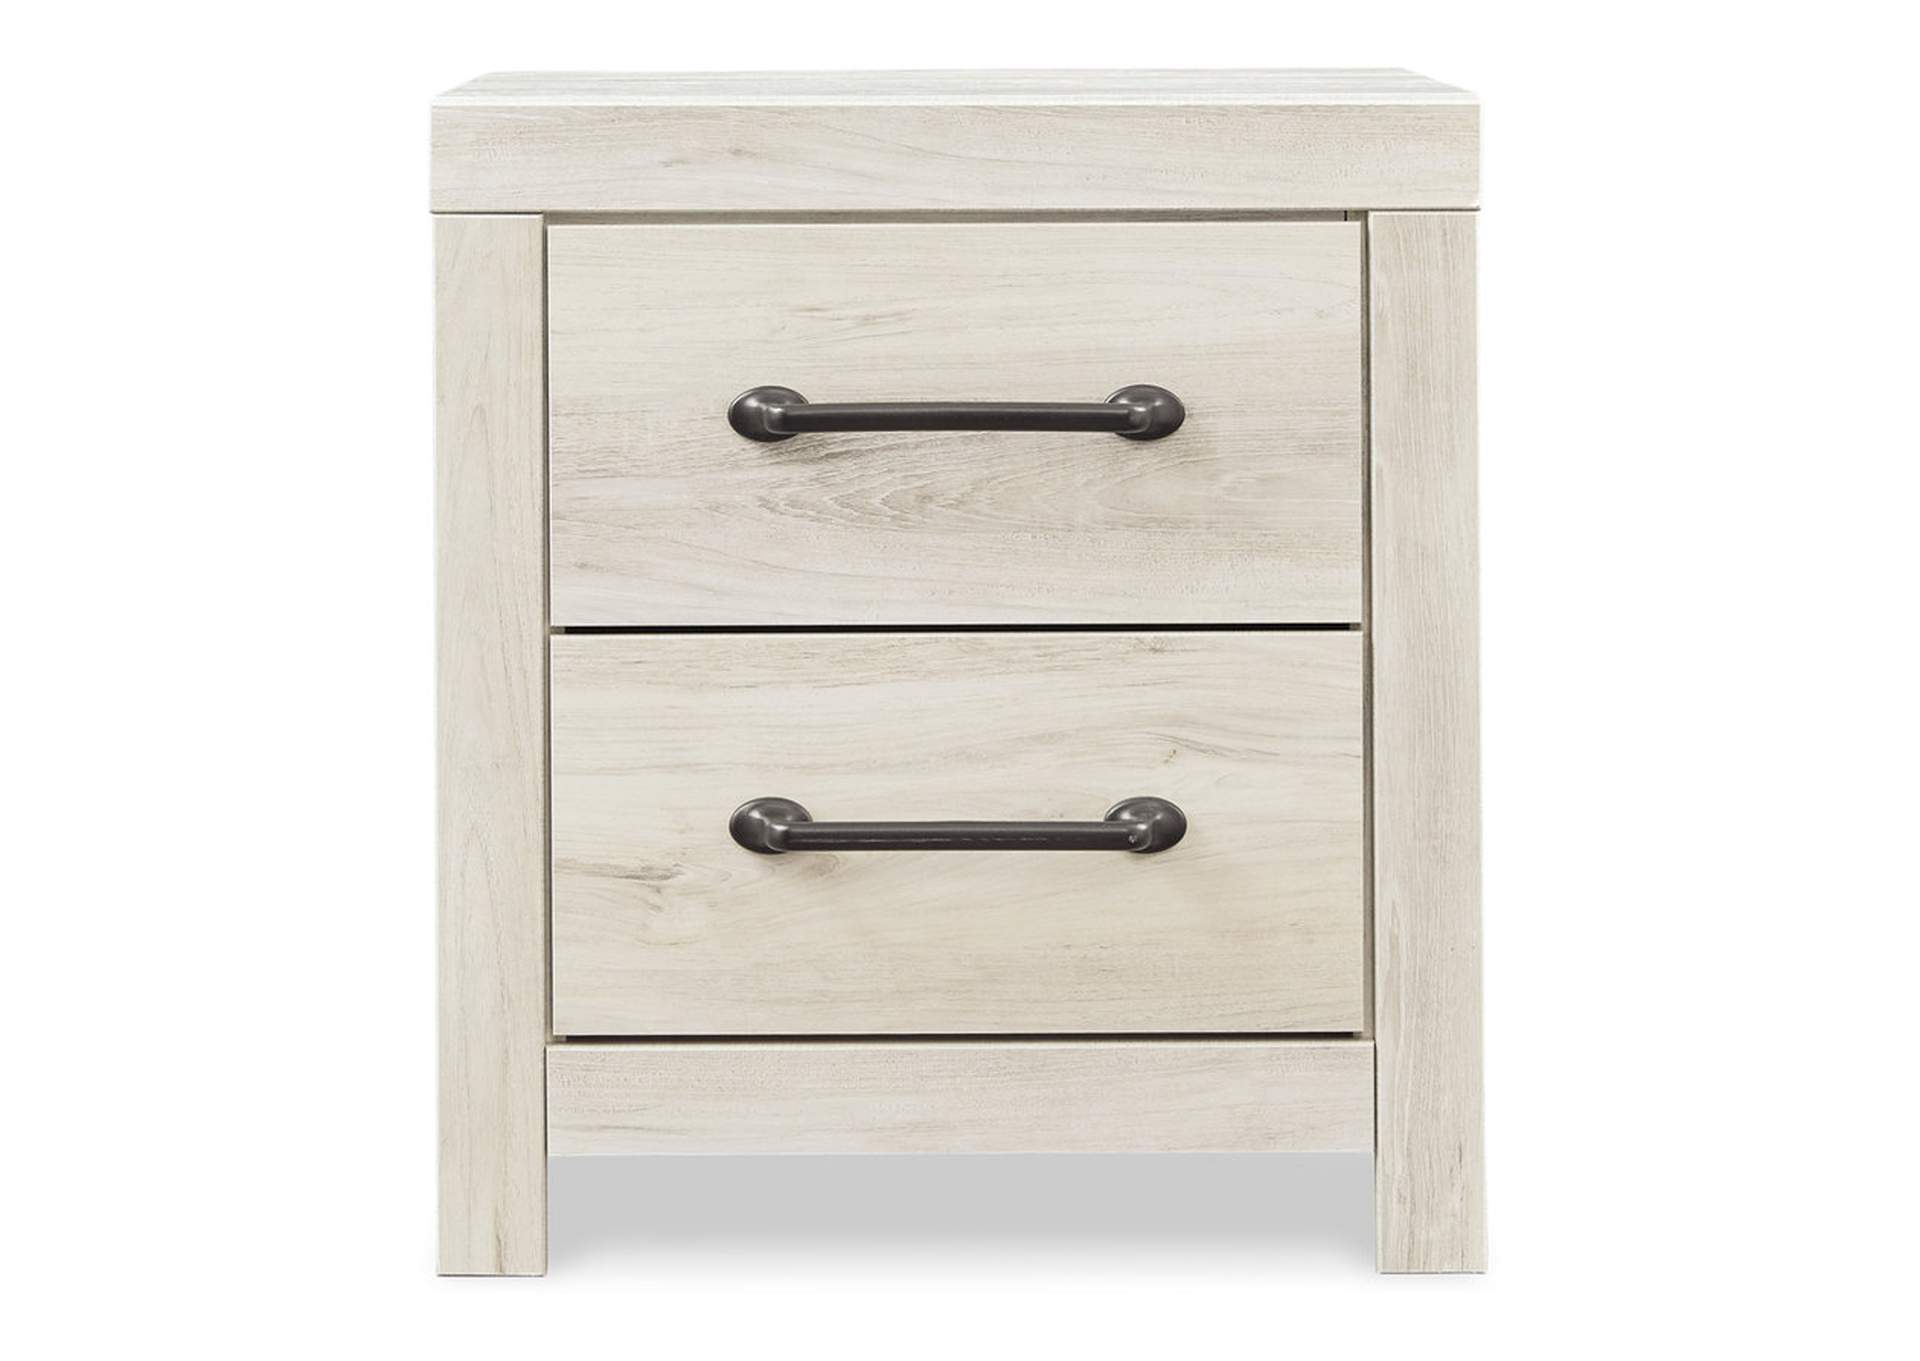 Cambeck Nightstand,Signature Design By Ashley